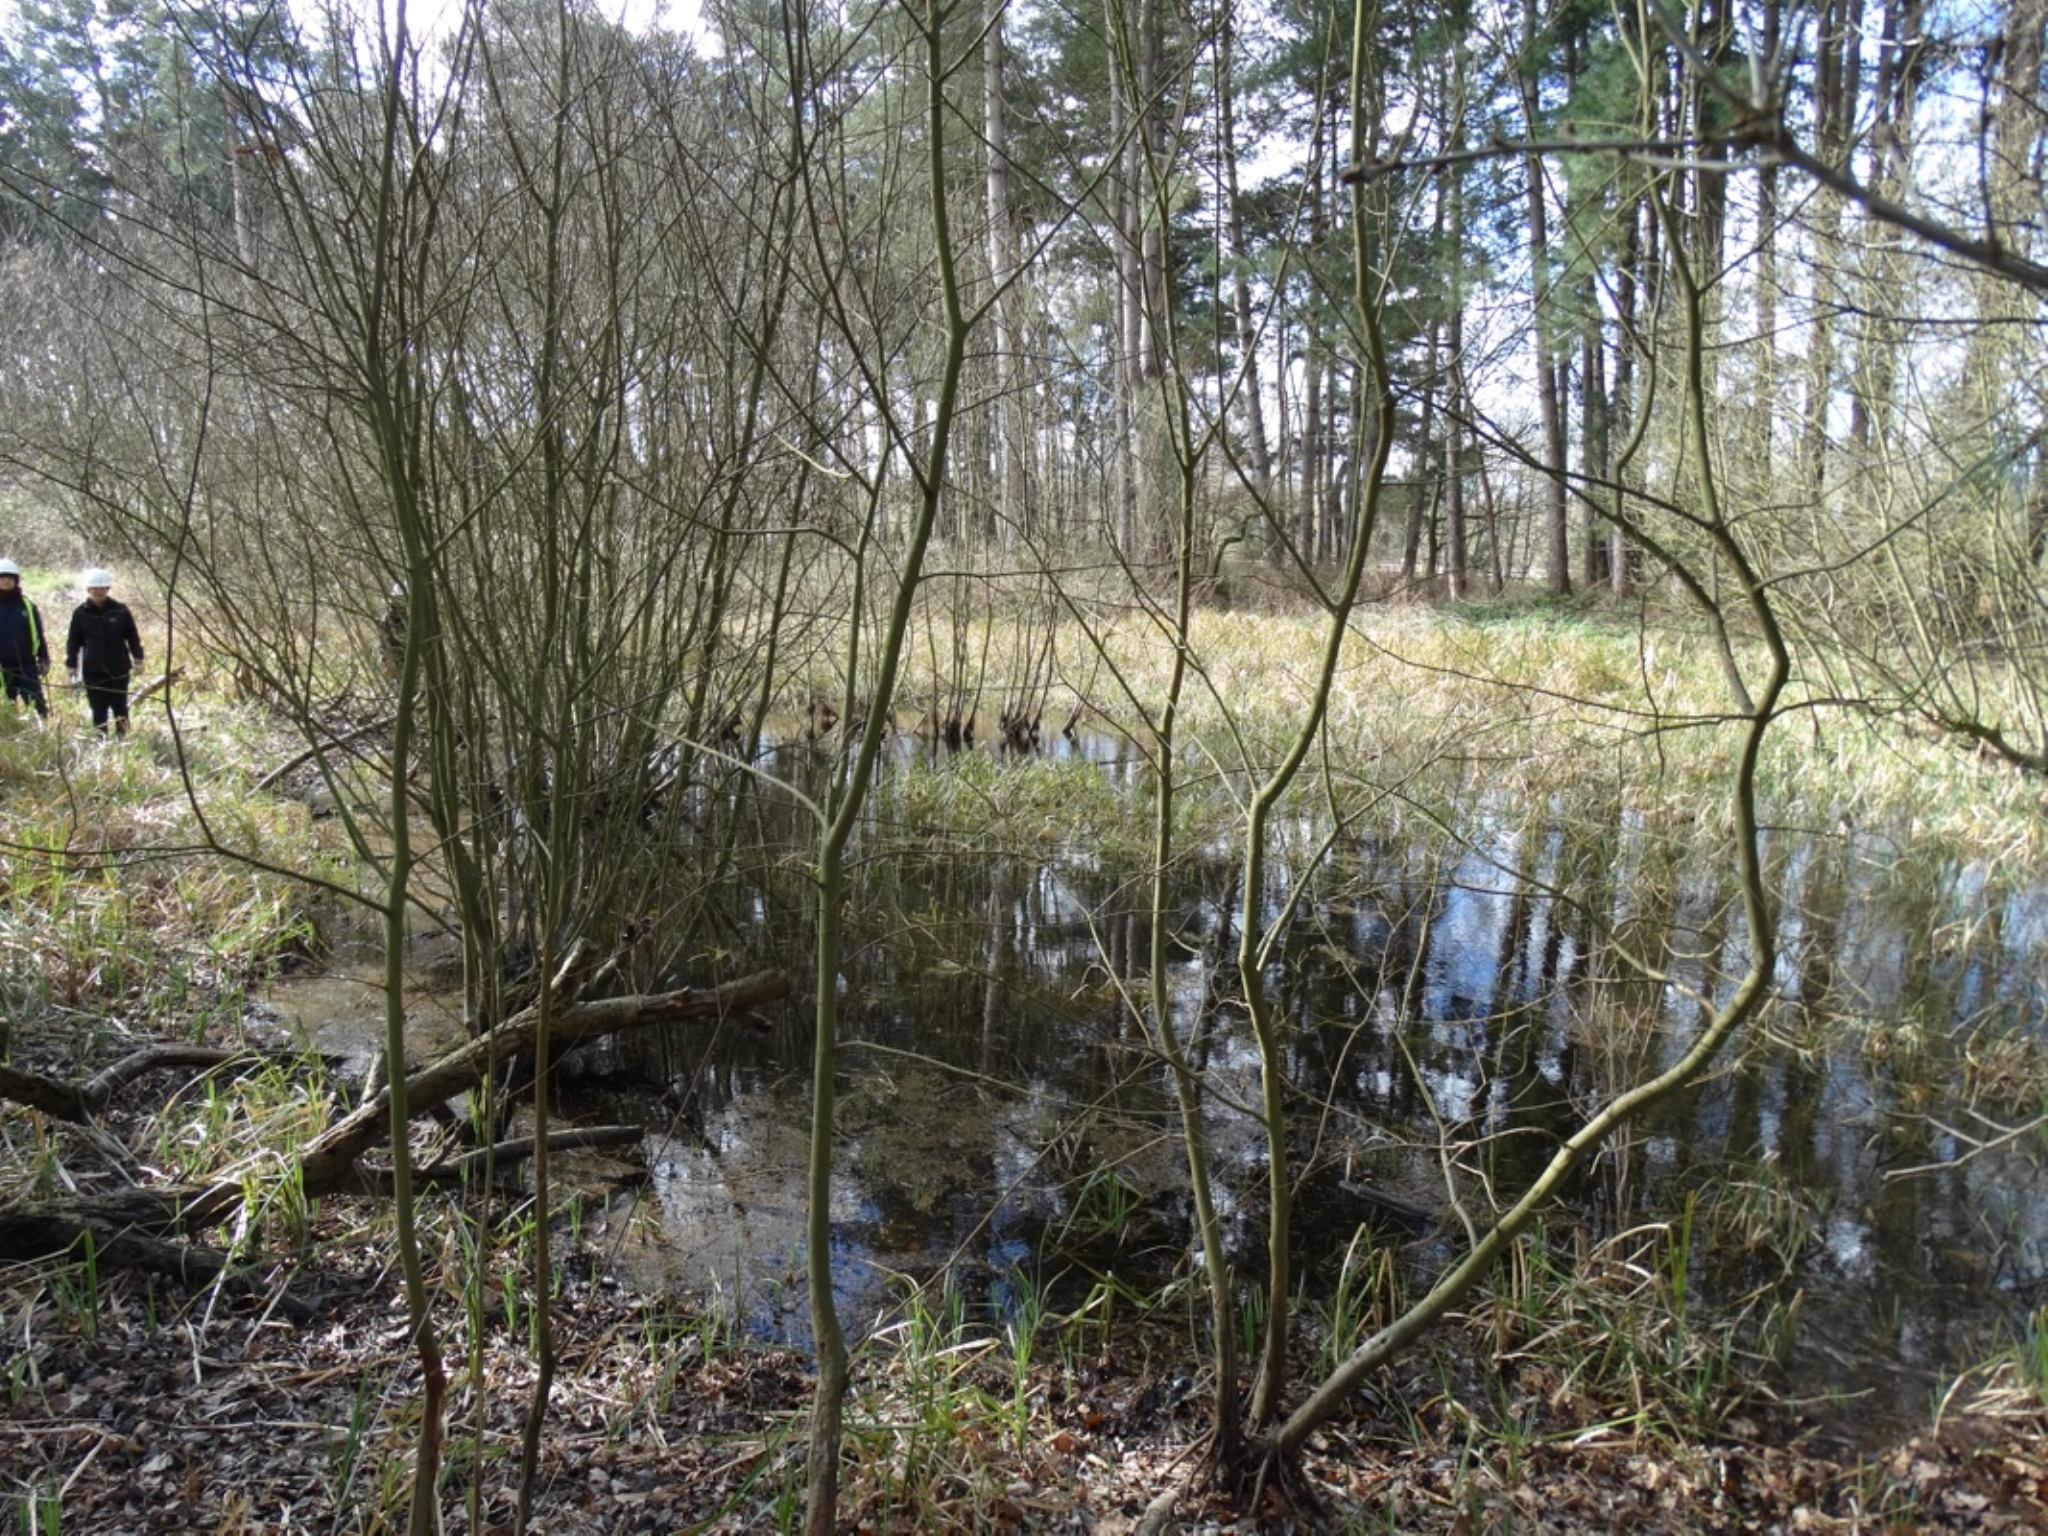 A photo from the FoTF Conservation Event - March 2019 - Clearance work around, and in, the ponds at Harling Woods, Harling : A photo of one of the ponds at Harling Woods